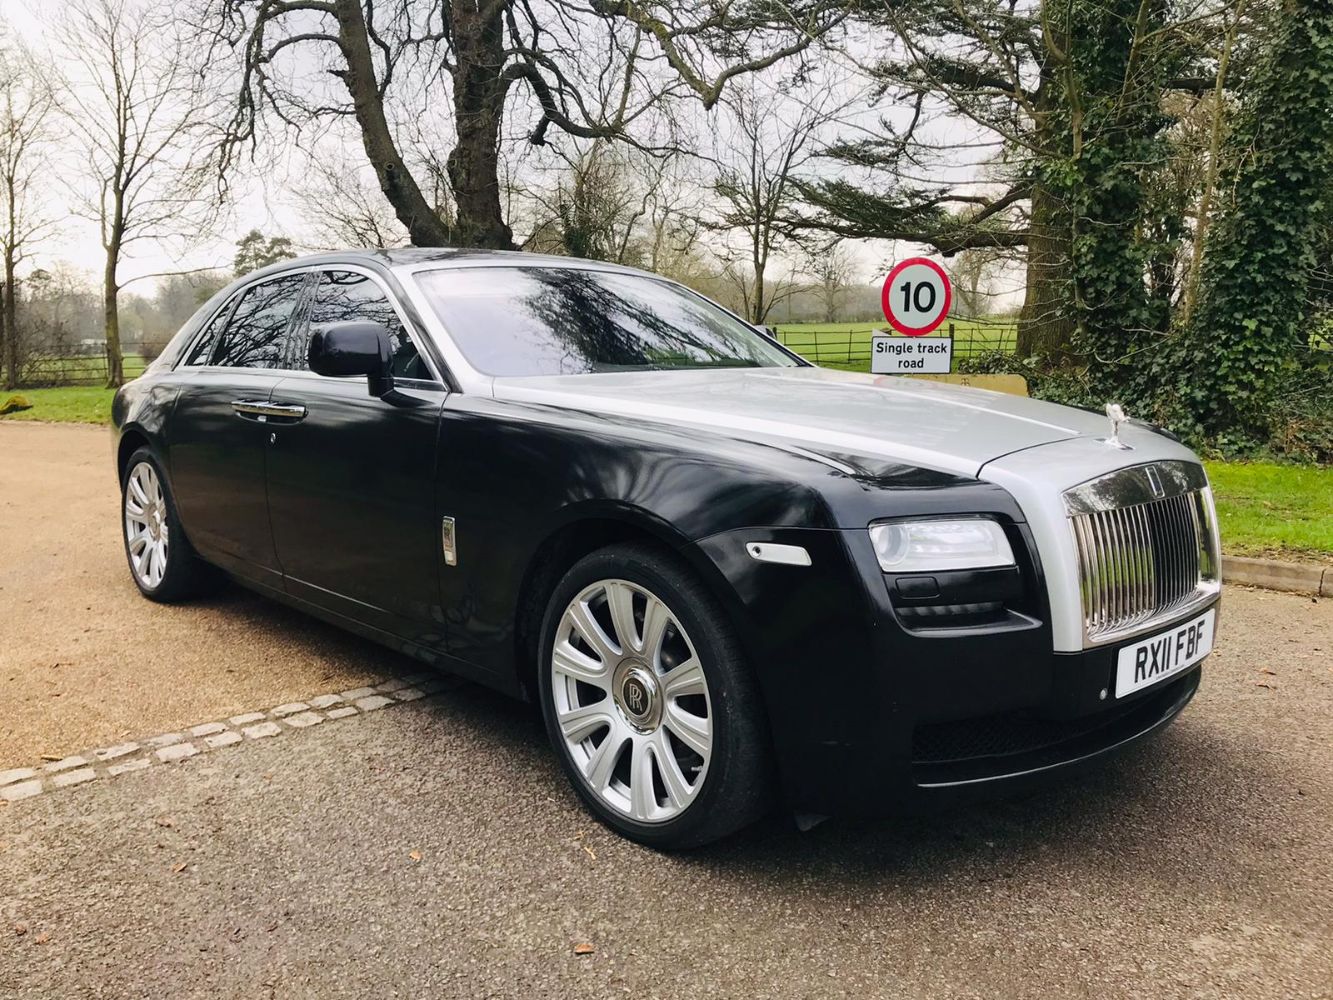 ROLLS ROYCE GHOST V12 (NEW SHAPE) MONSTER SPEC - BMW X6 3.0D (2014 REG) SELECTION OF MANY COMPANY VEHICLES UP FOR DISPOSAL